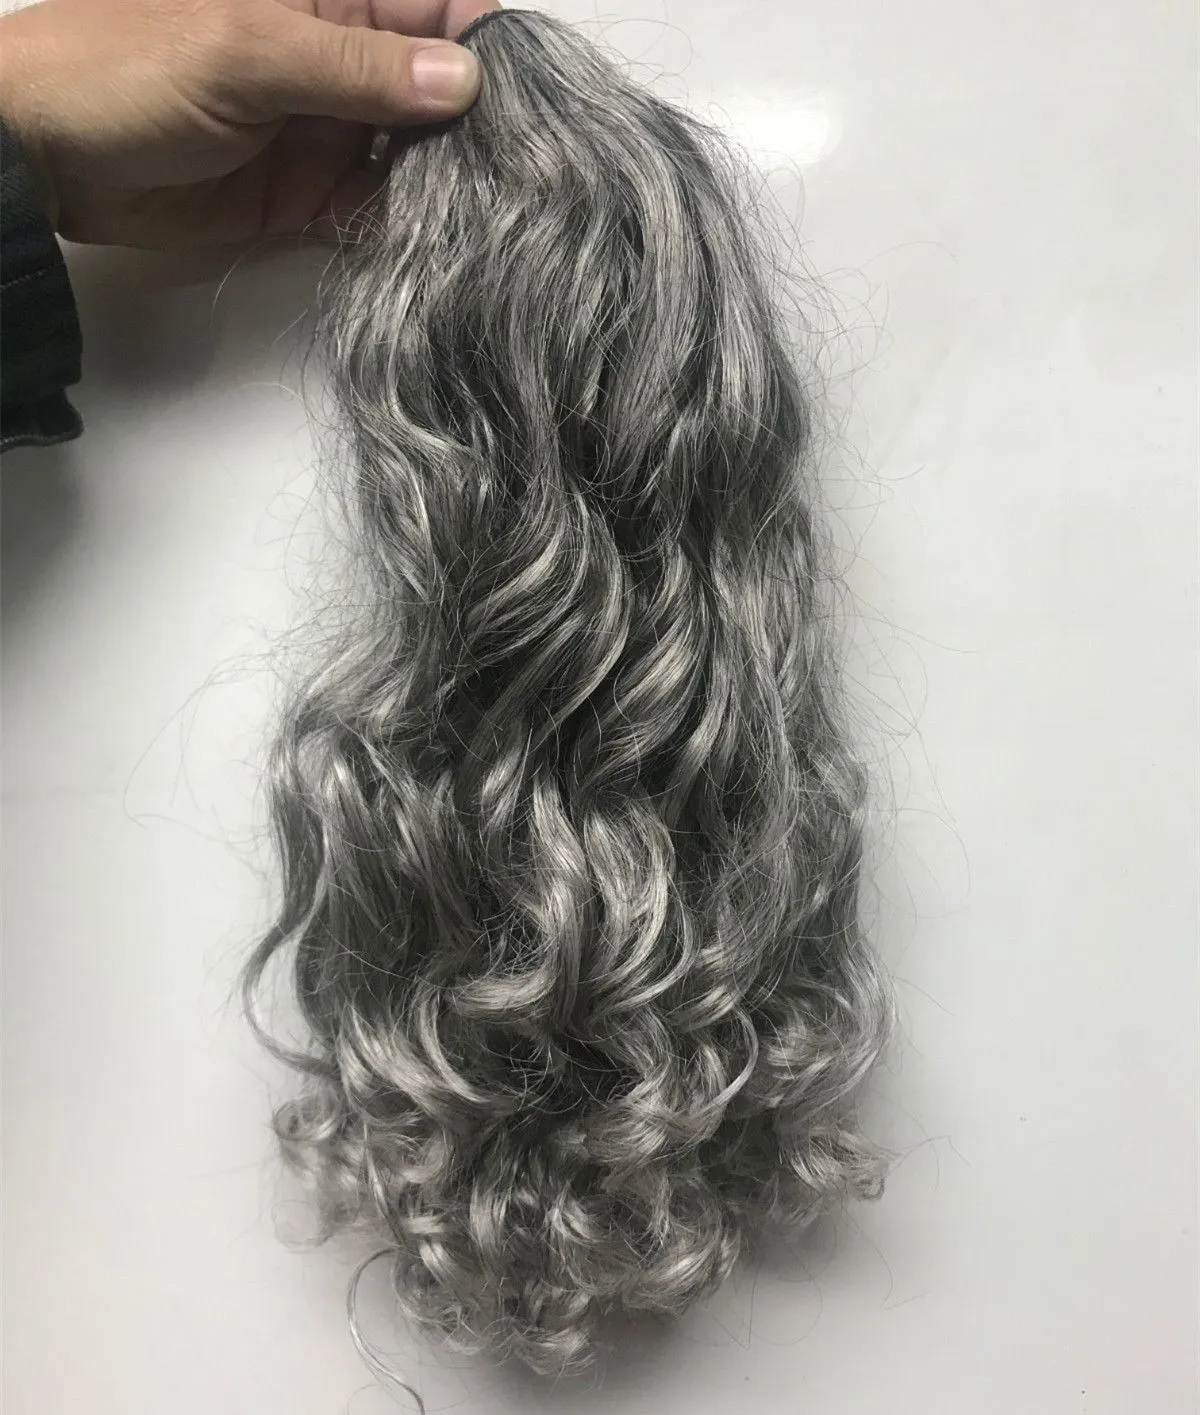 DIVA long Grey wavy human hair pony tail hairpiece drawstring gray women ponytail hair extension salt and pepper natural highlights